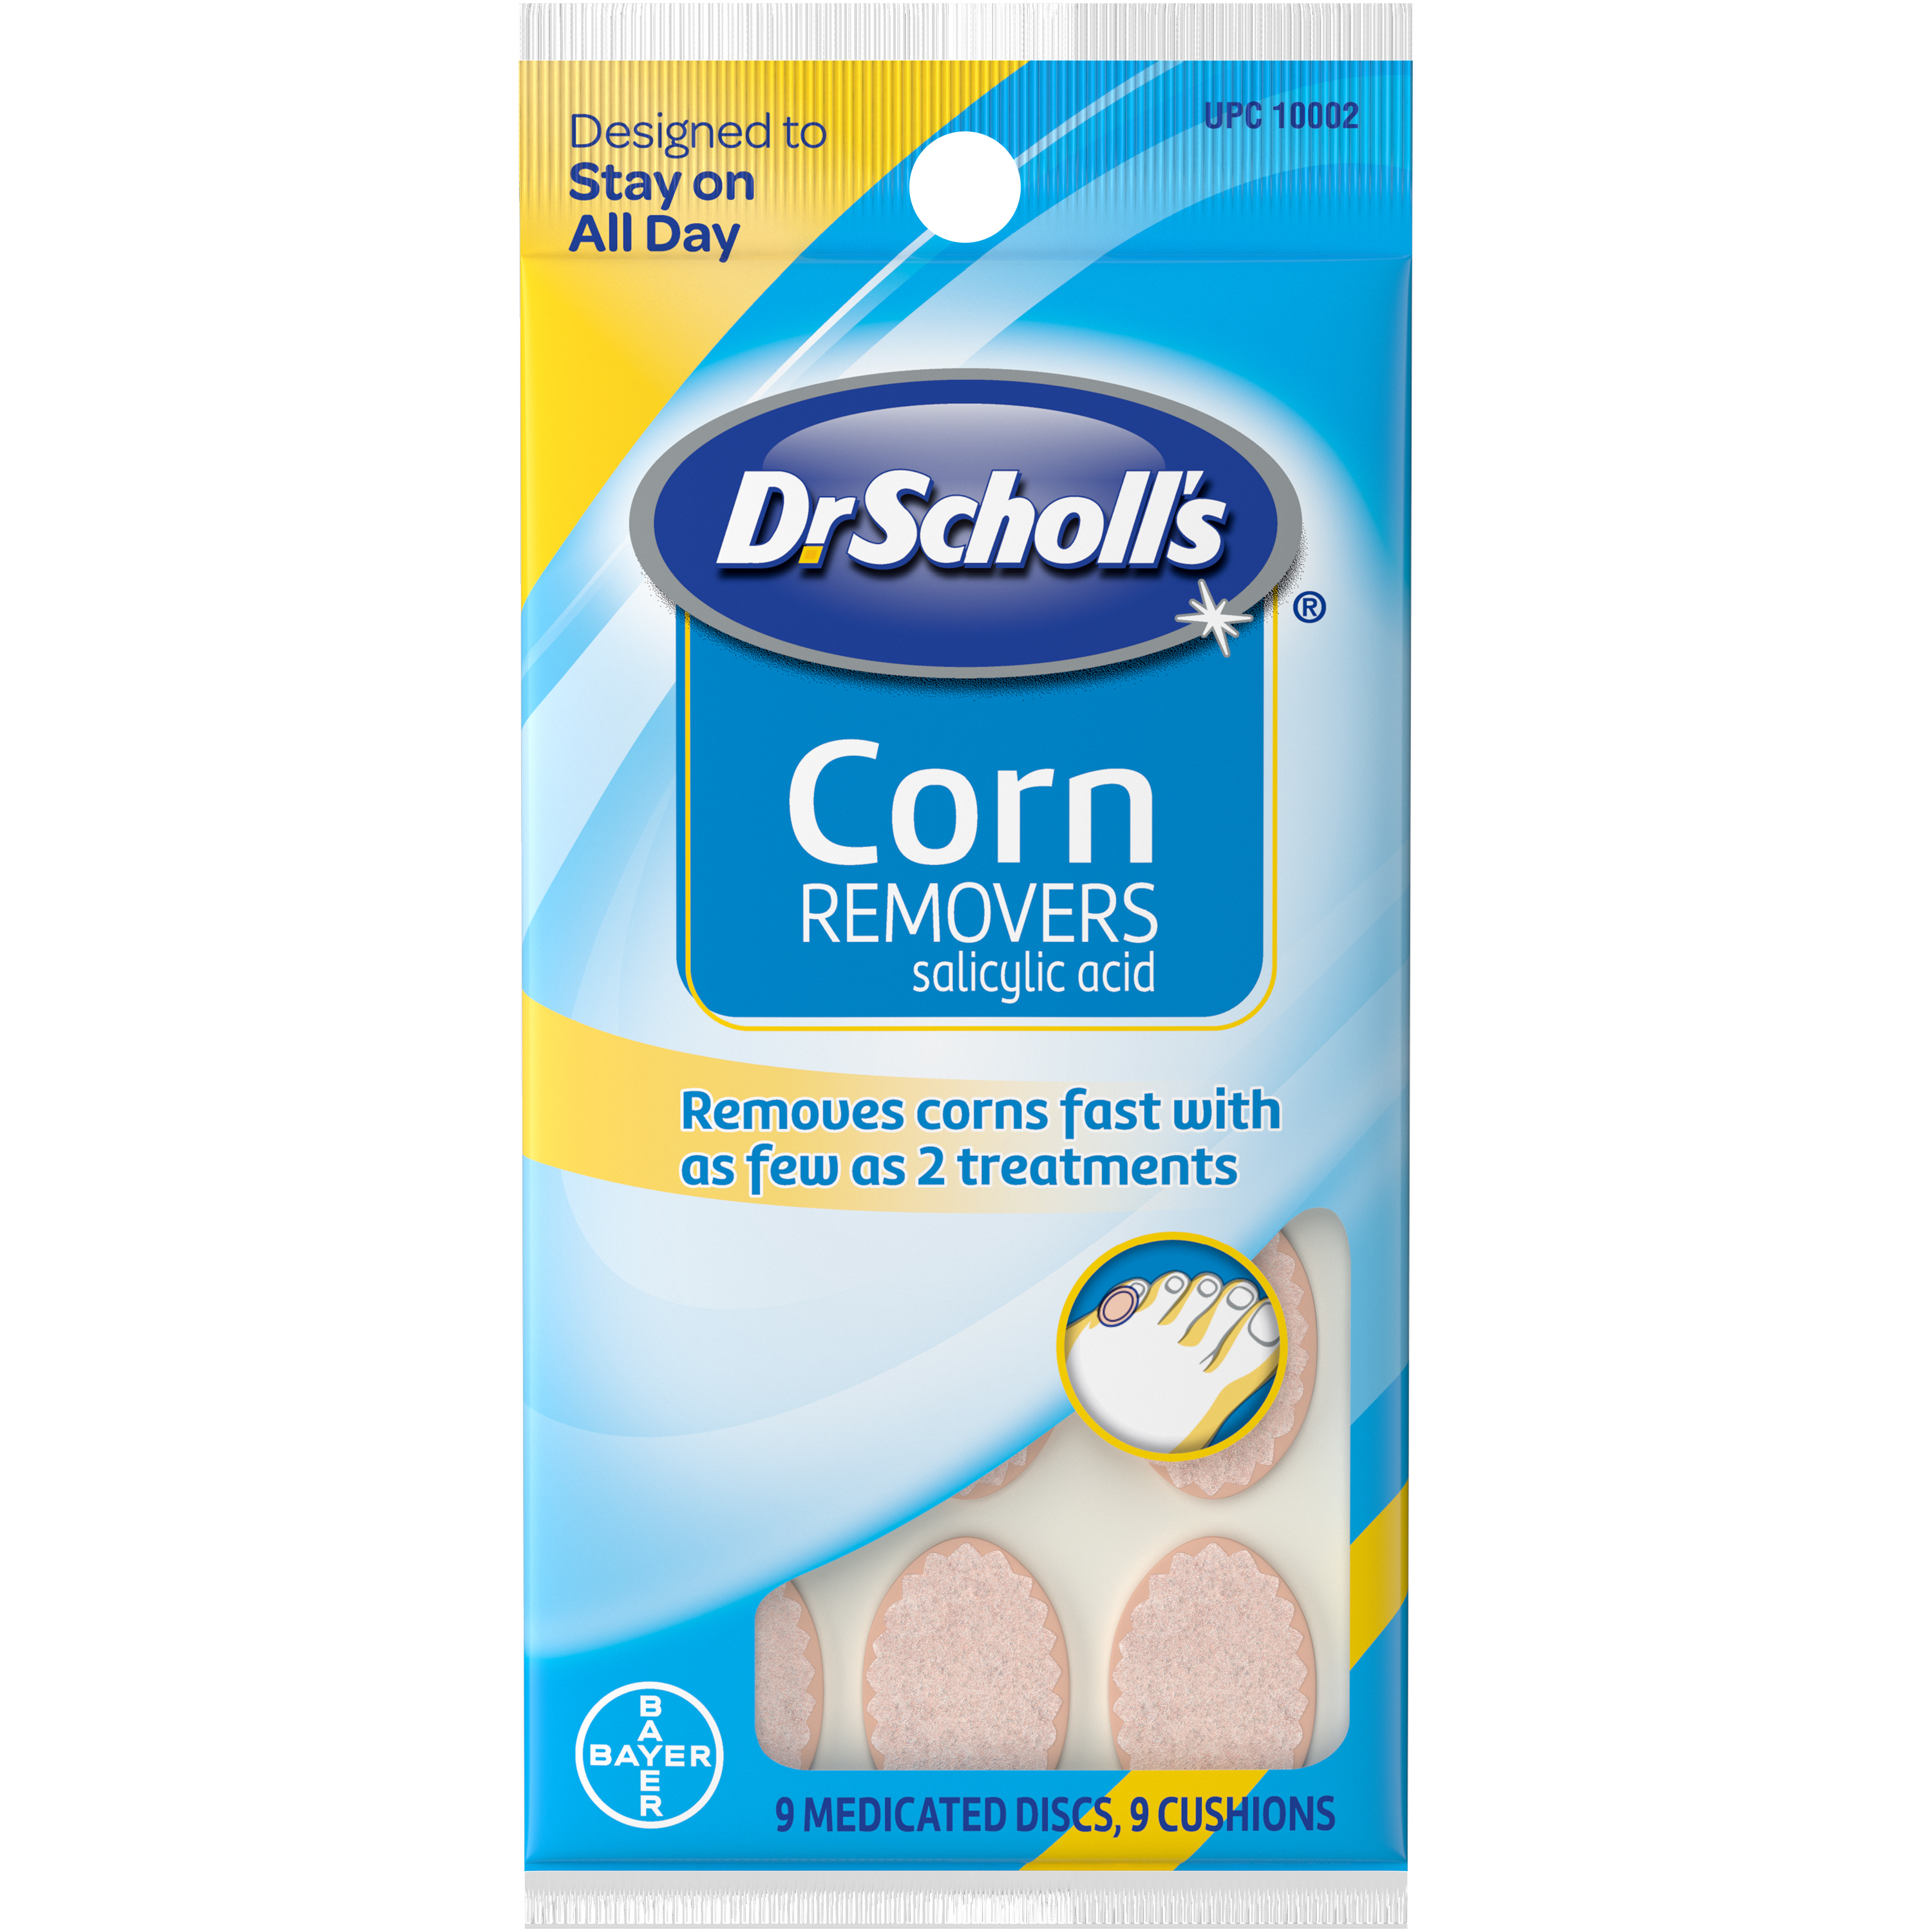 Dr. Scholl's Corn Removers, 9 Cushions, 9 Medicated Discs - image 2 of 8